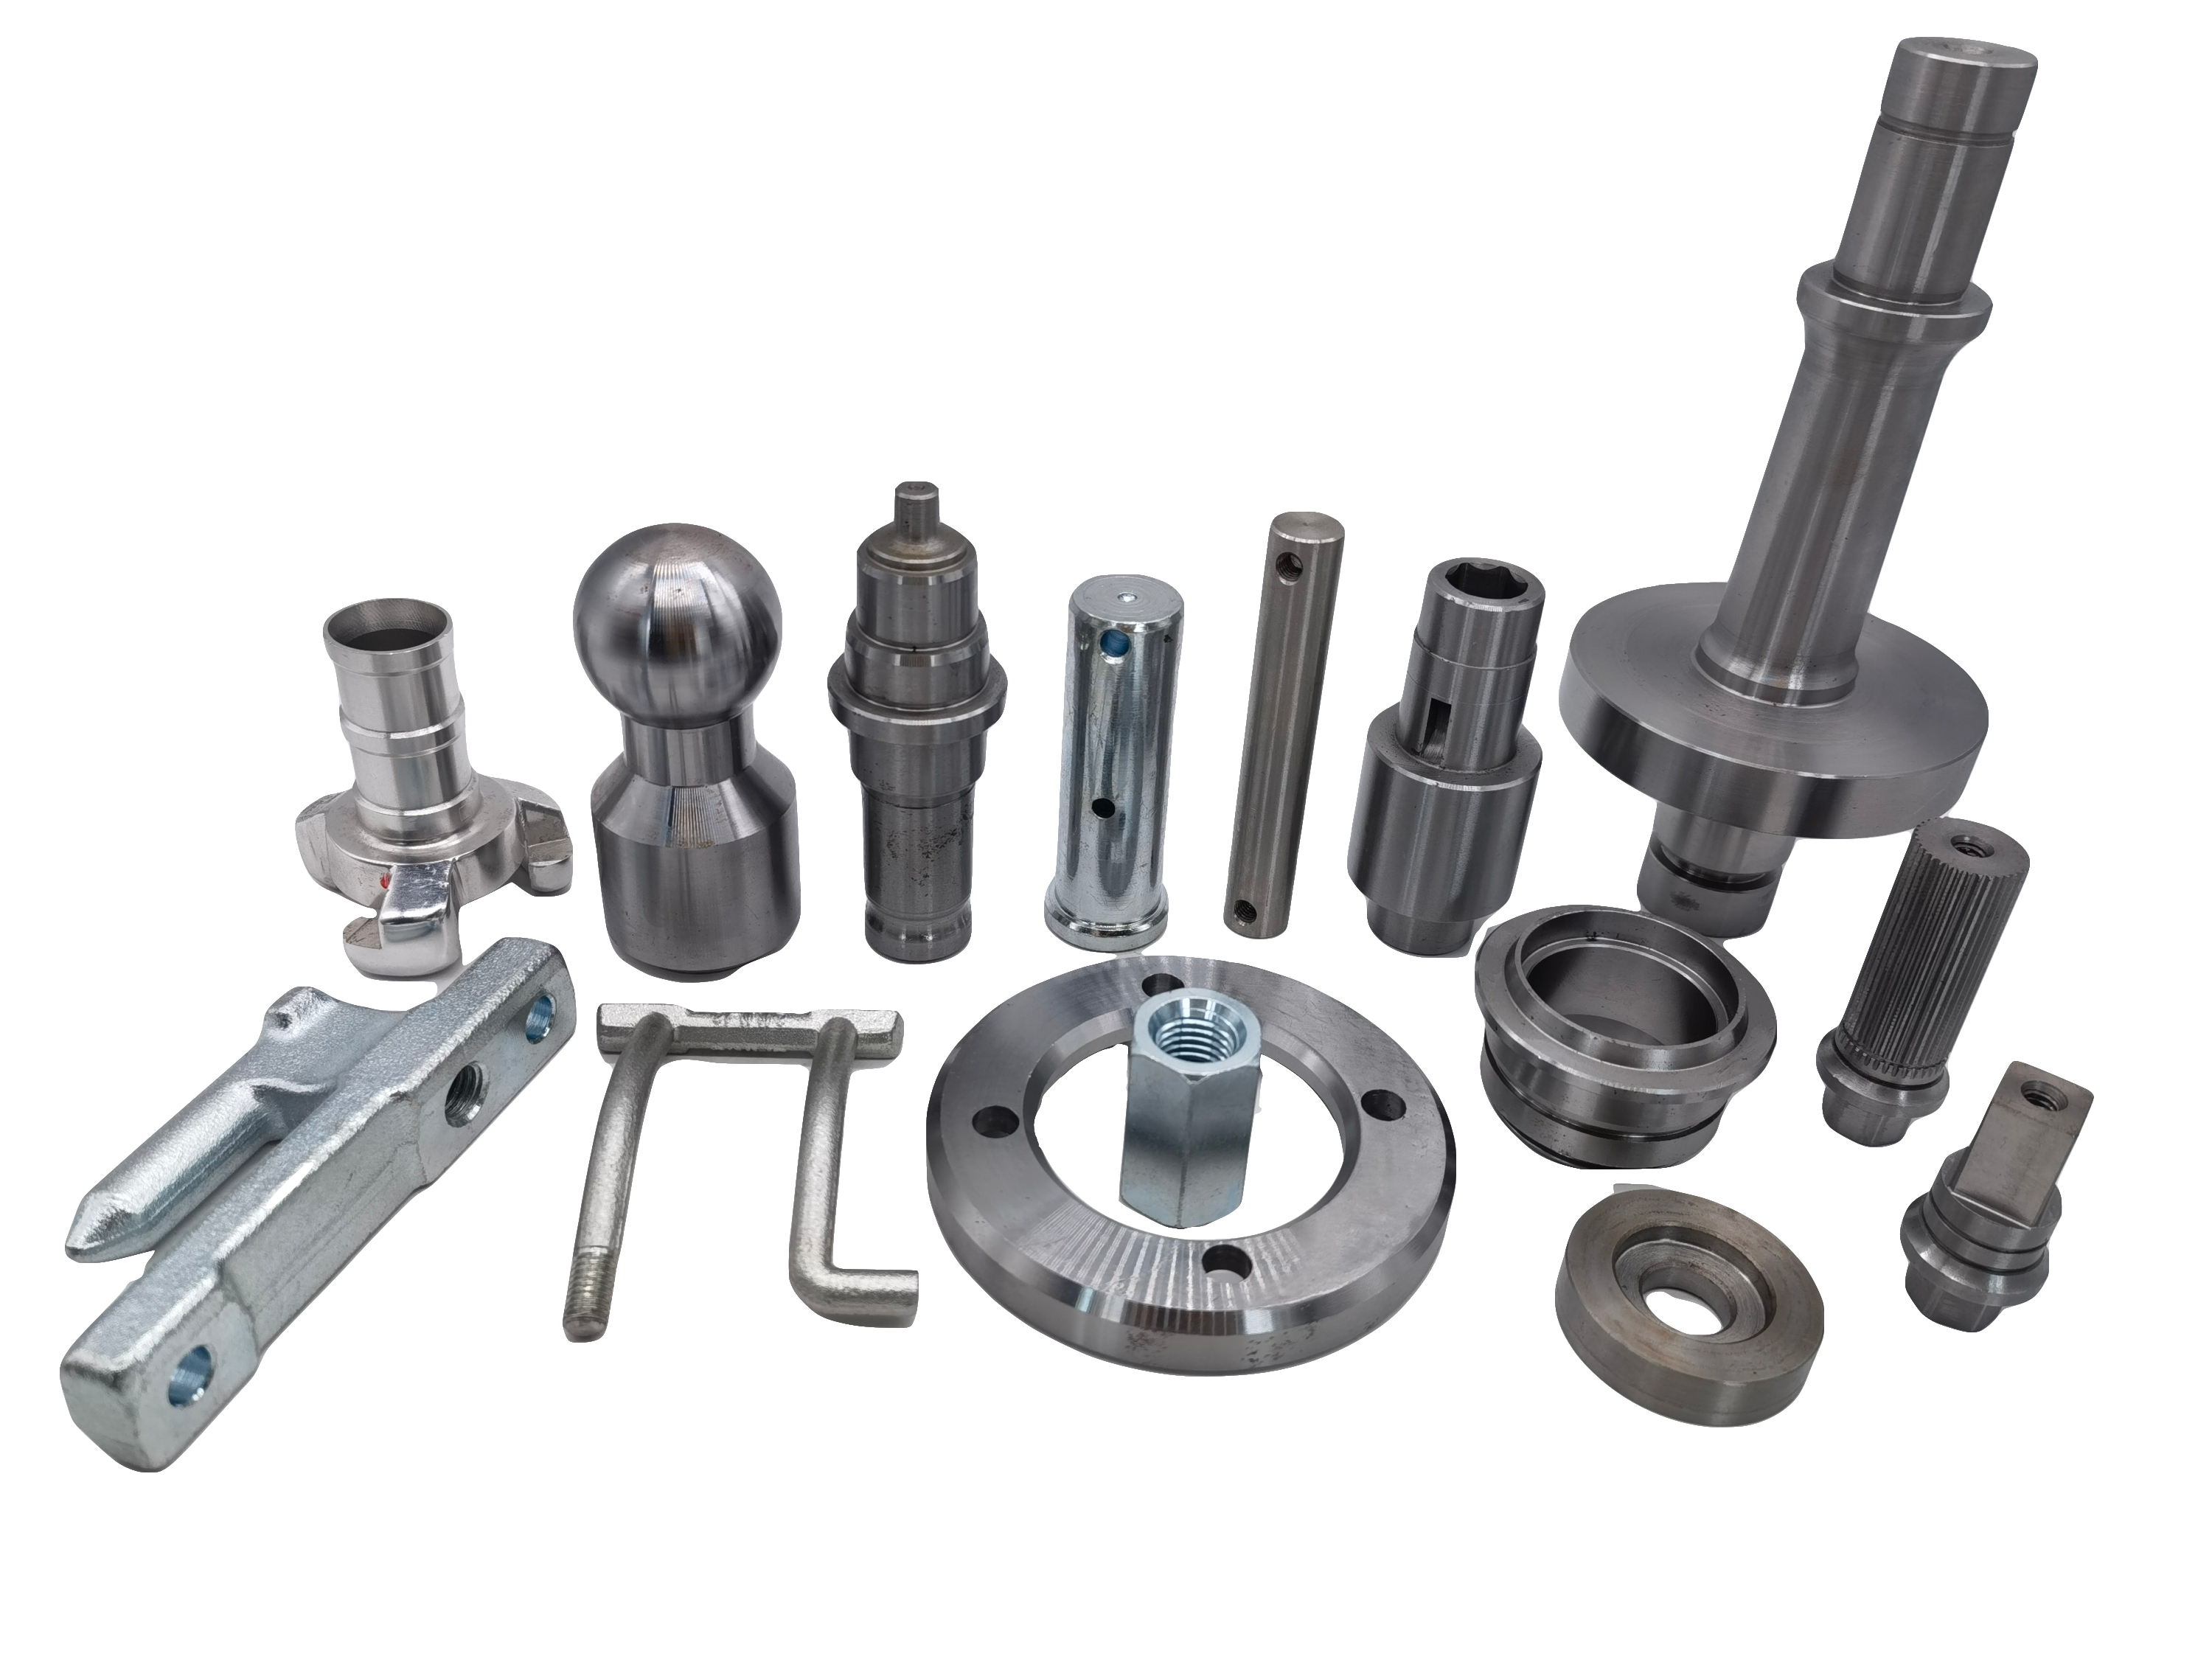 CNC machined component OEM products